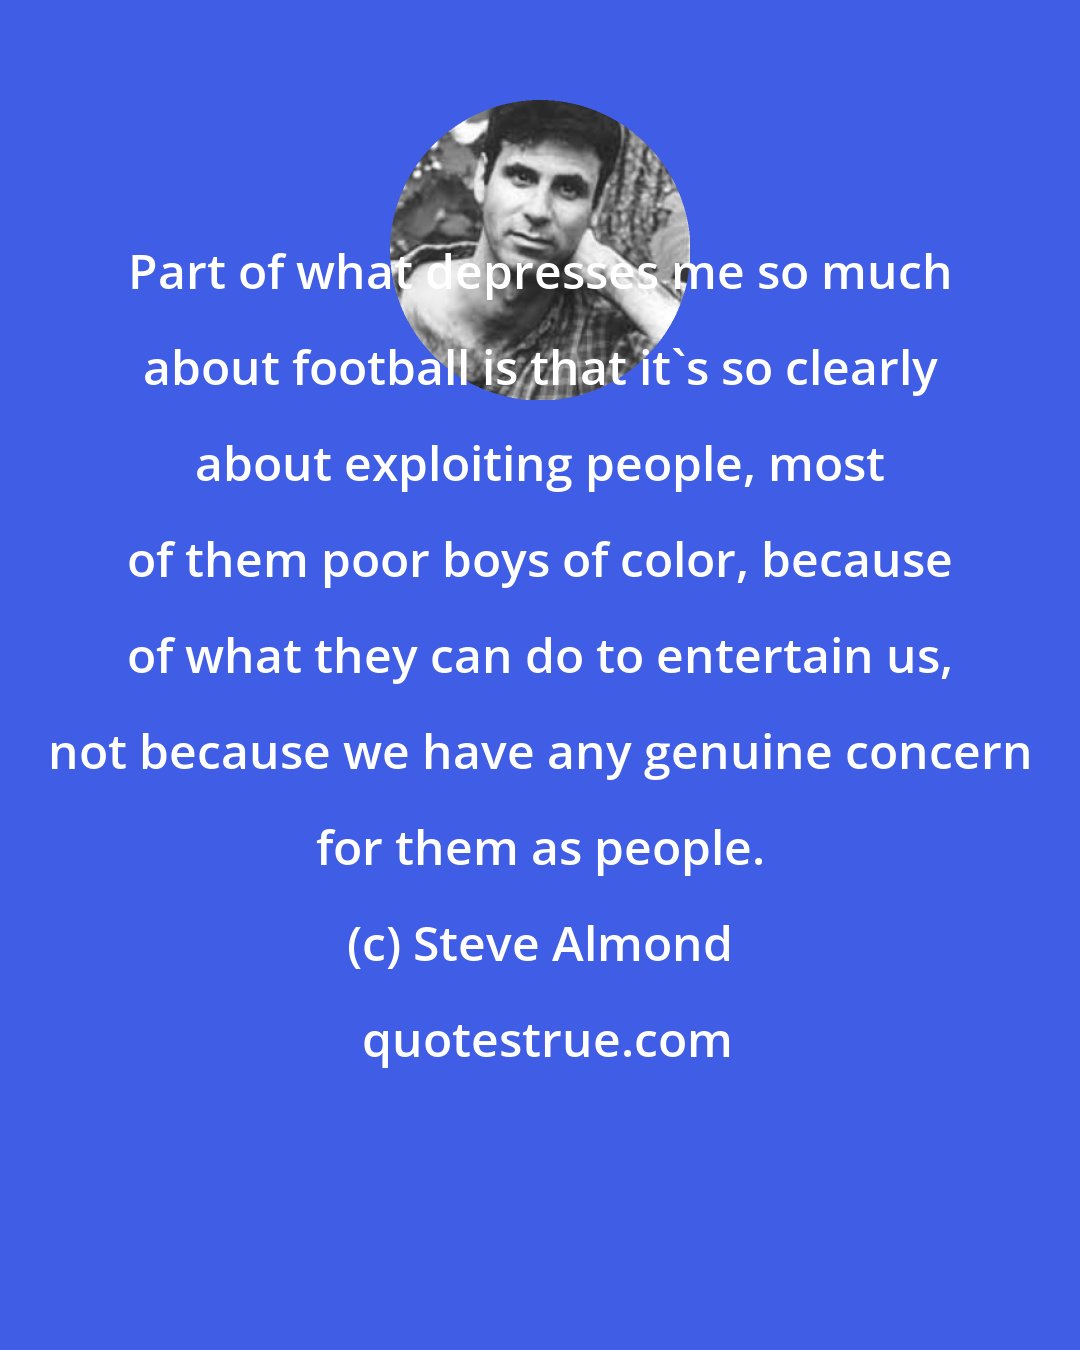 Steve Almond: Part of what depresses me so much about football is that it's so clearly about exploiting people, most of them poor boys of color, because of what they can do to entertain us, not because we have any genuine concern for them as people.